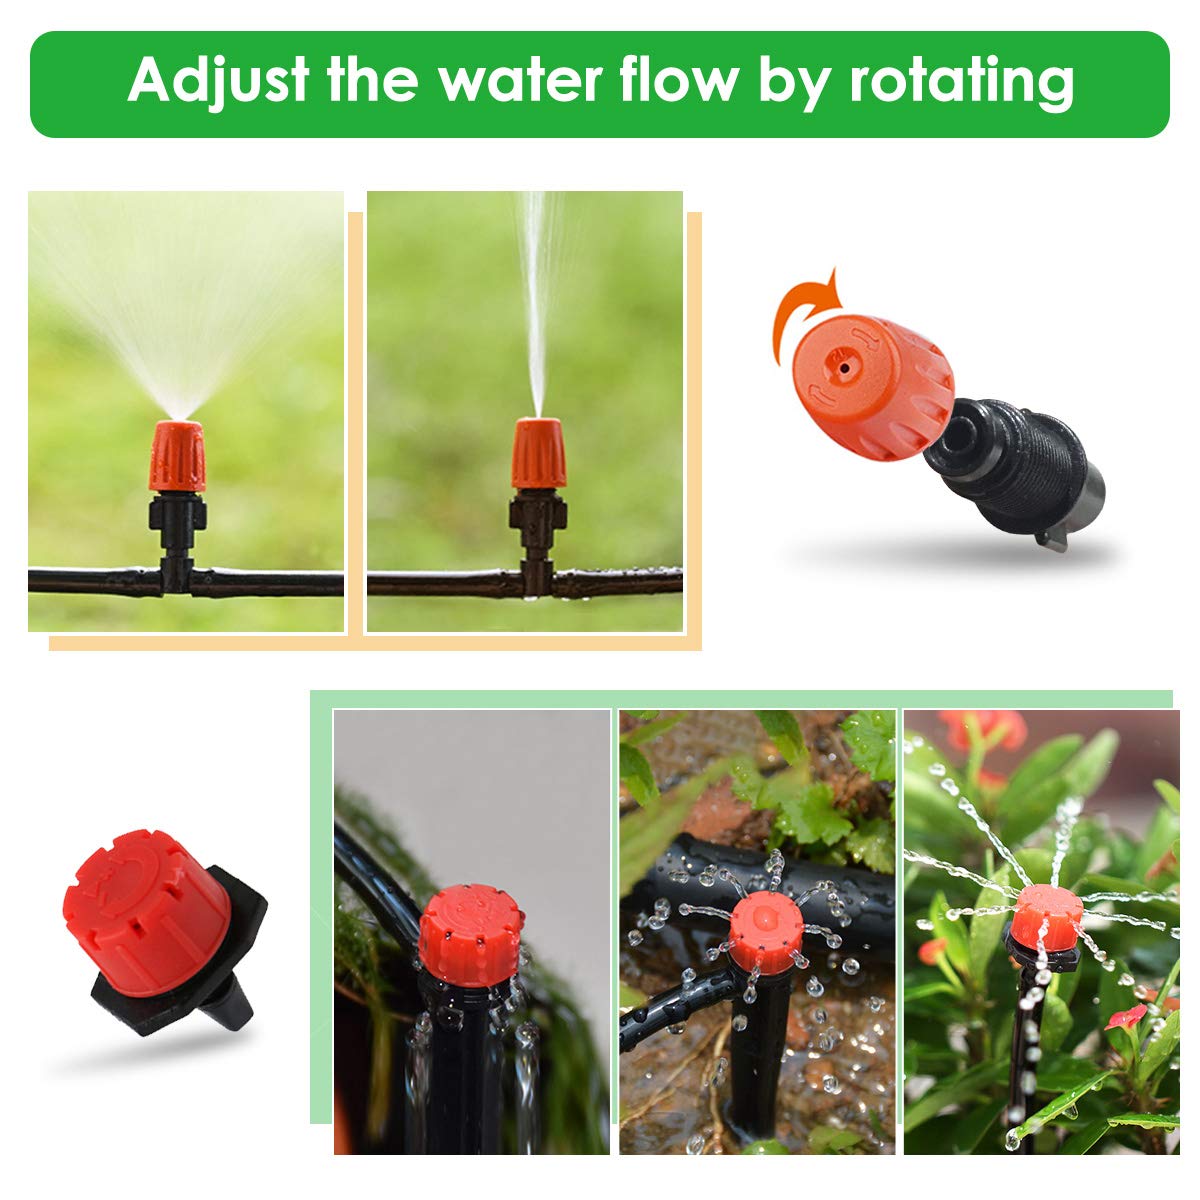 166Pcs-50ft-15m-Automatic-Drip-Irrigation-Plant-Watering-Kit-Mist-Cooling-Irrigation-System-for-Gree-1685781